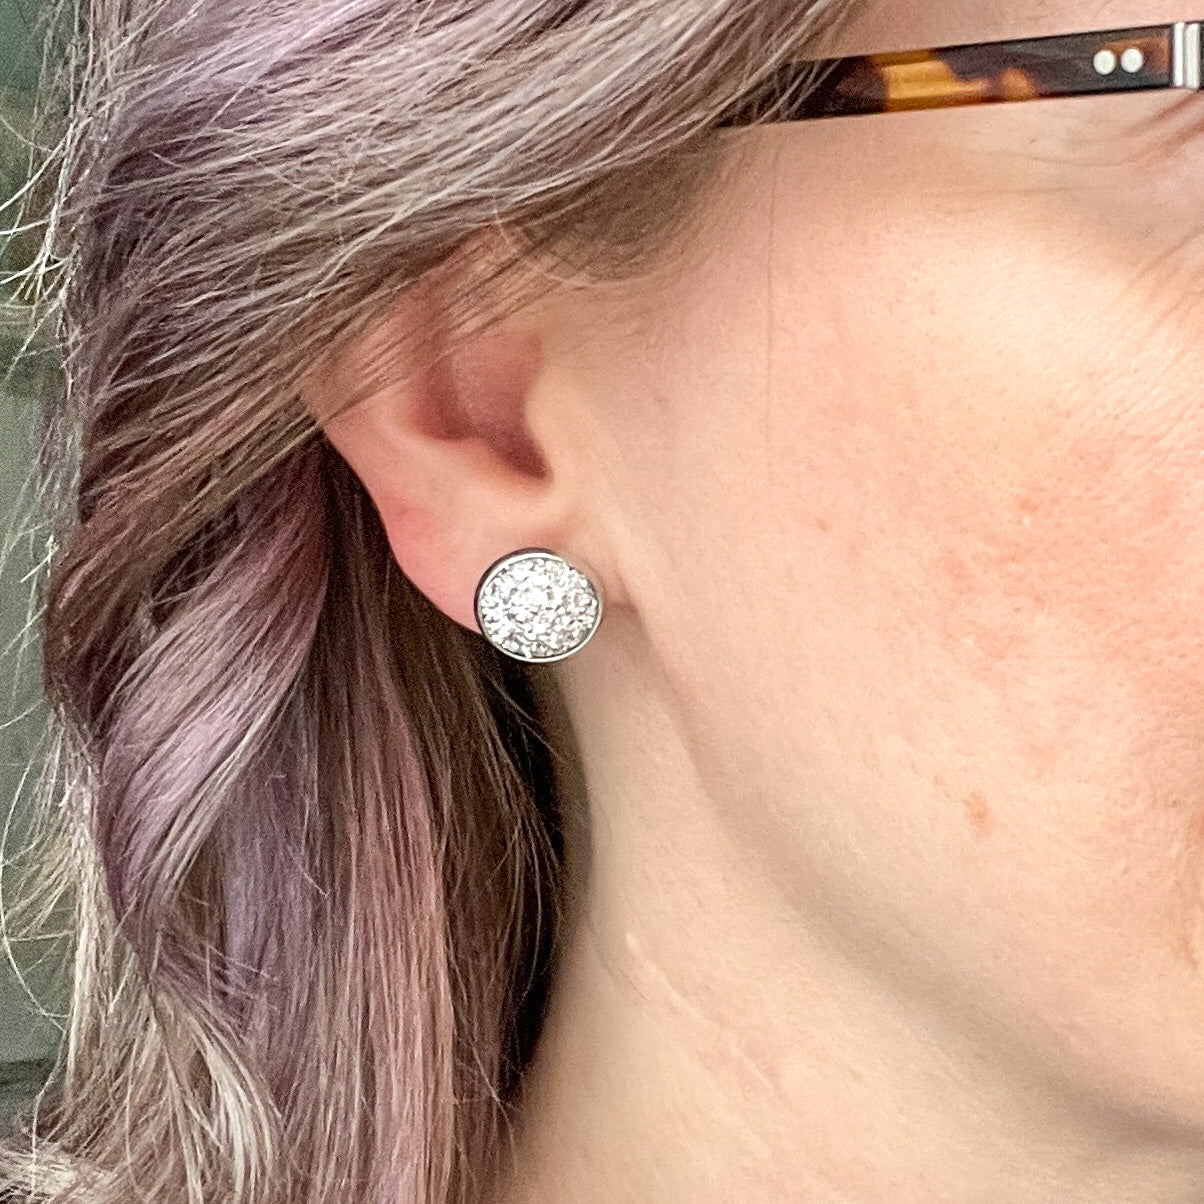 Coastal Blue Frosted Faux Druzy Studs 12mm: Choose Silver or Gold Settings